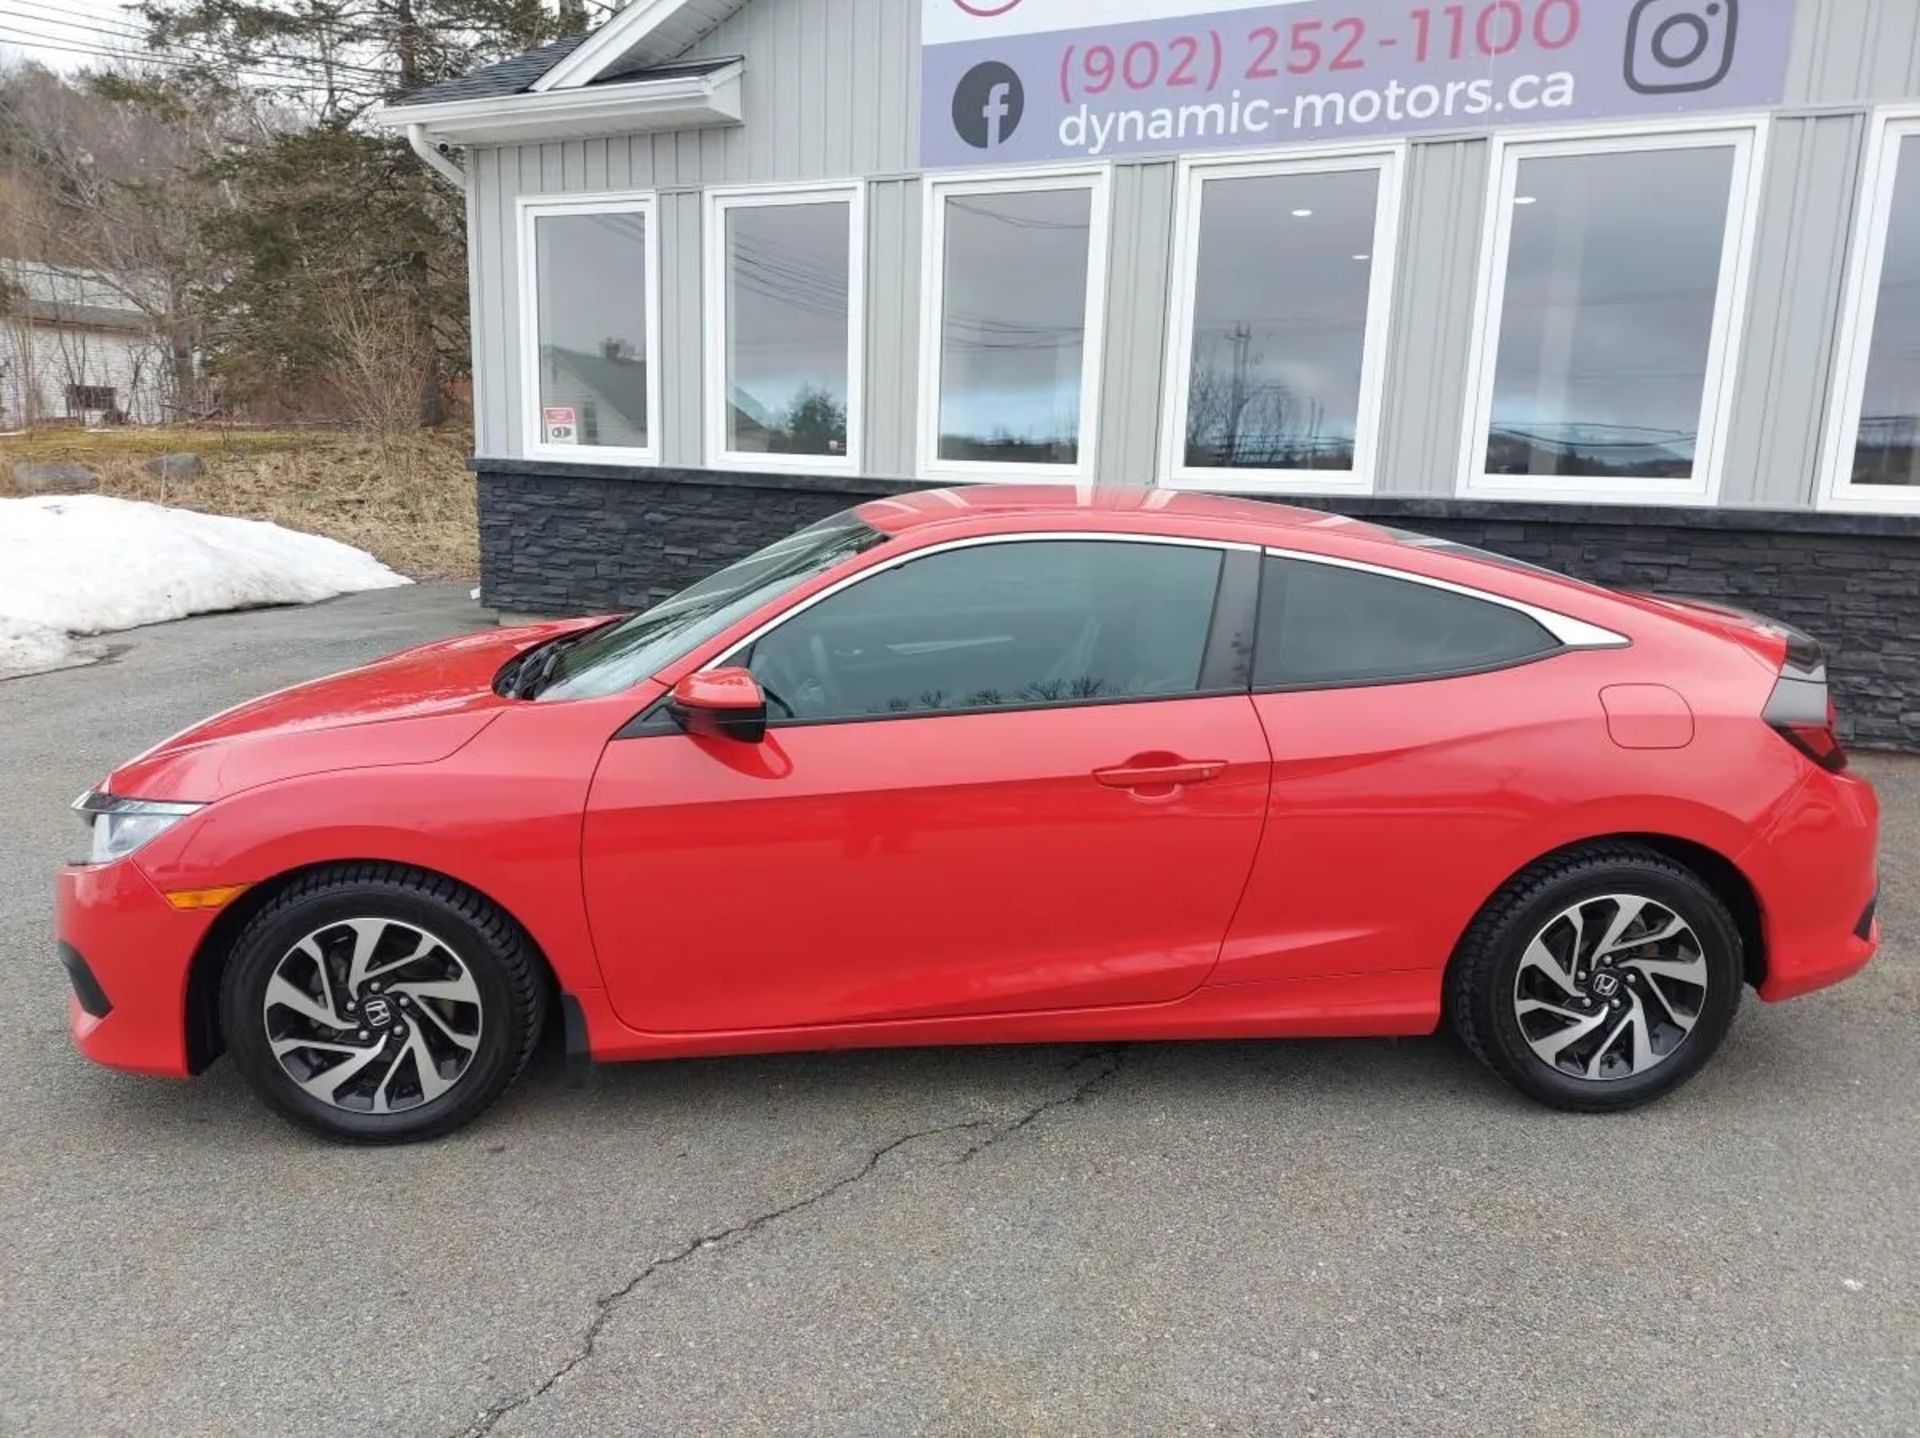 2017 HONDA CIVIC COUPE LX COUPE 6 SPEED! UNDERCOATED! DEALER SERVICED! - Image 5 of 28